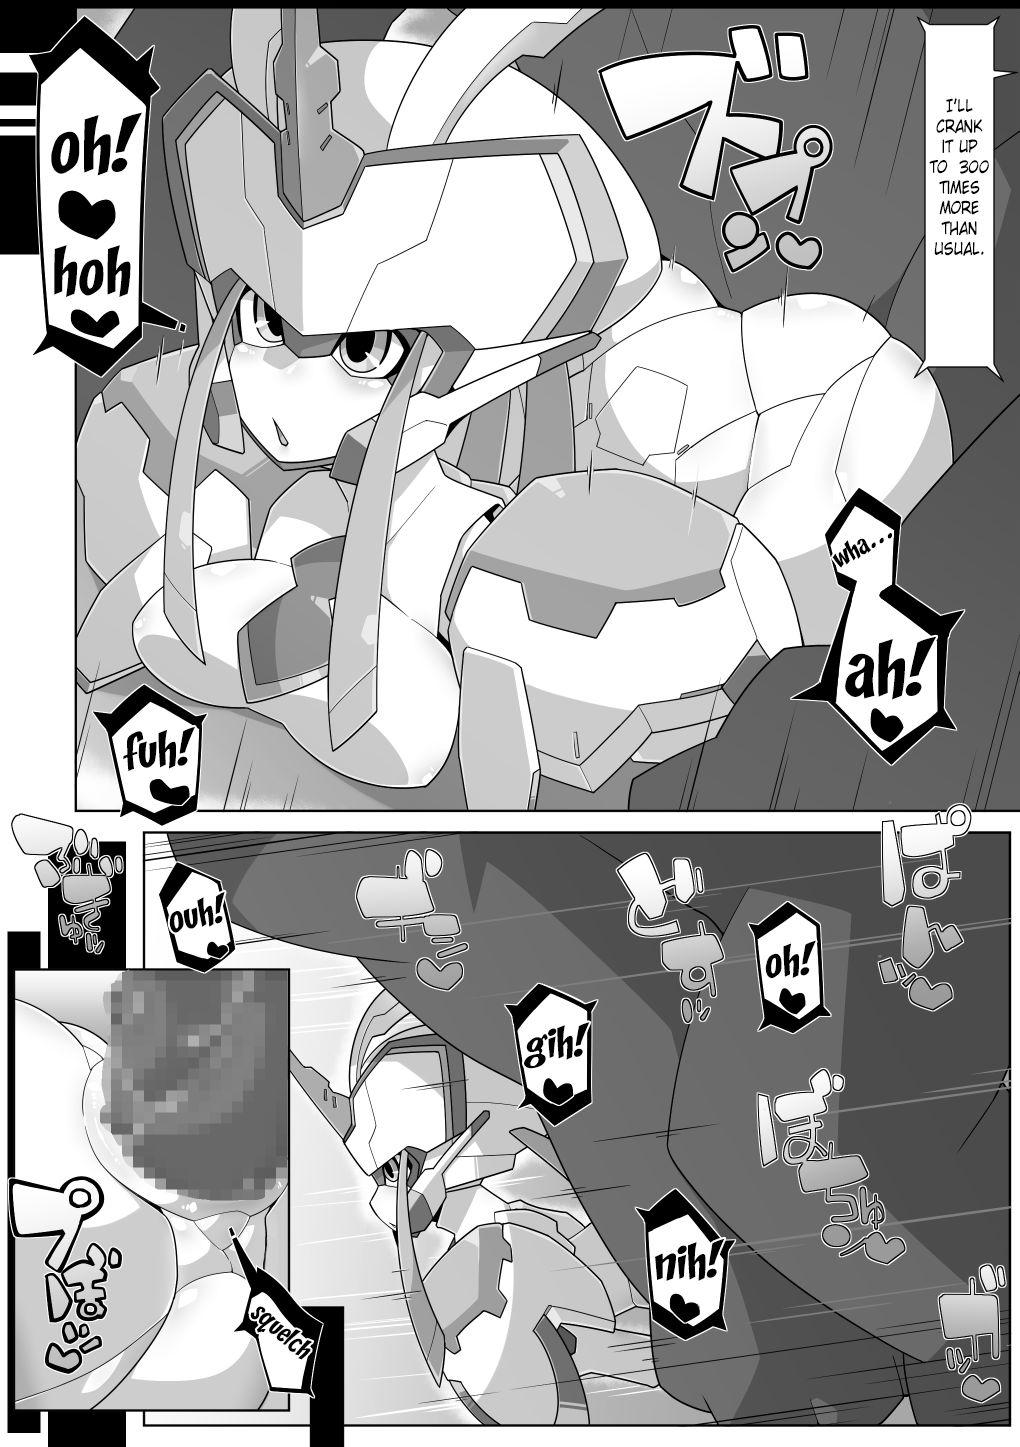 Redhead (C94) [Workaholic (Kni)] robo-hentai-book - Darling in the franxx Striptease - Page 4